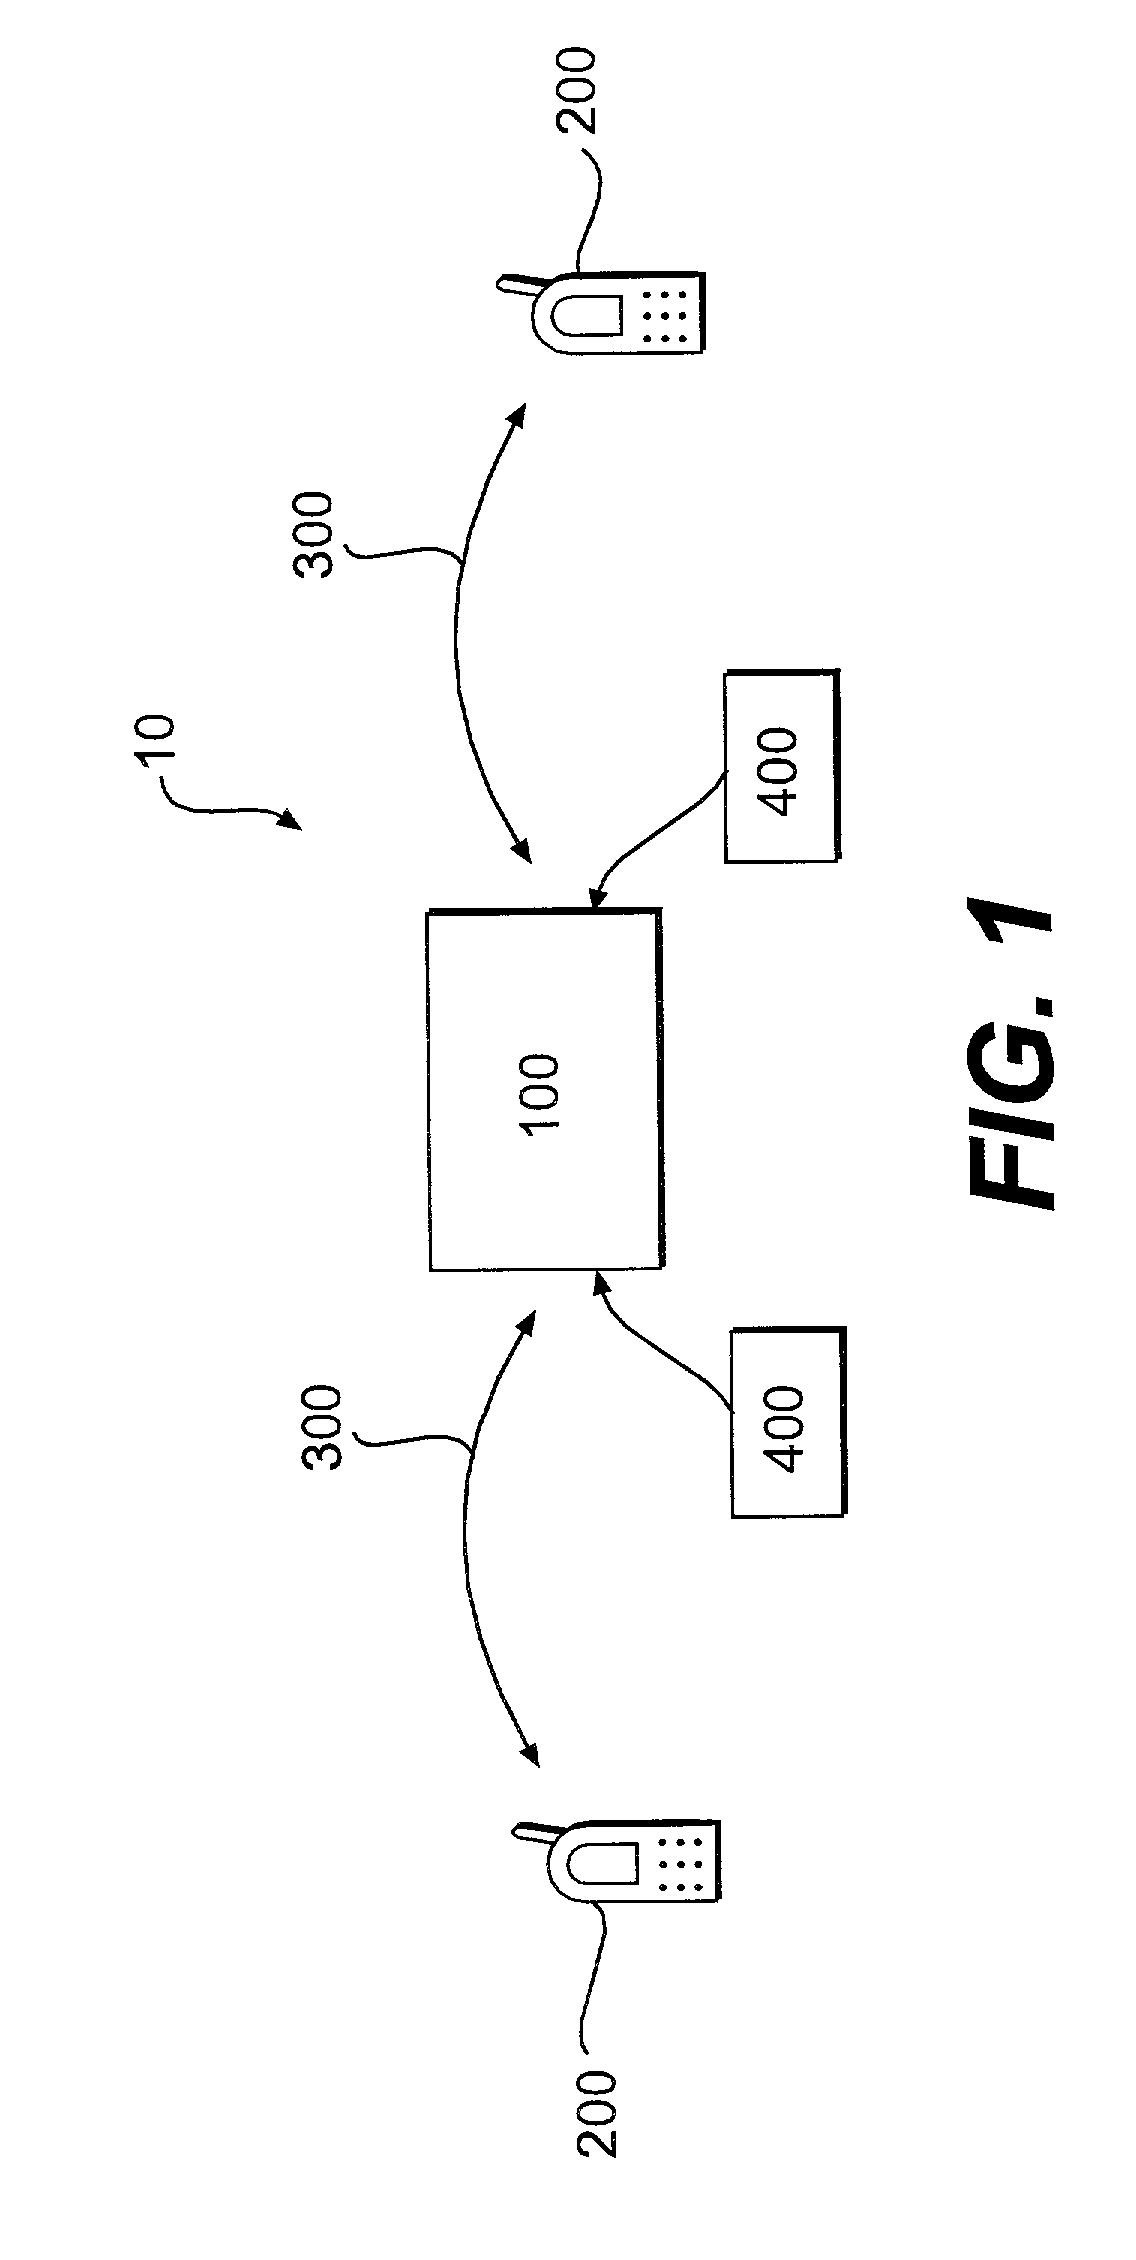 Method and system to facilitate interaction between and content delivery to users of a wireless communications network